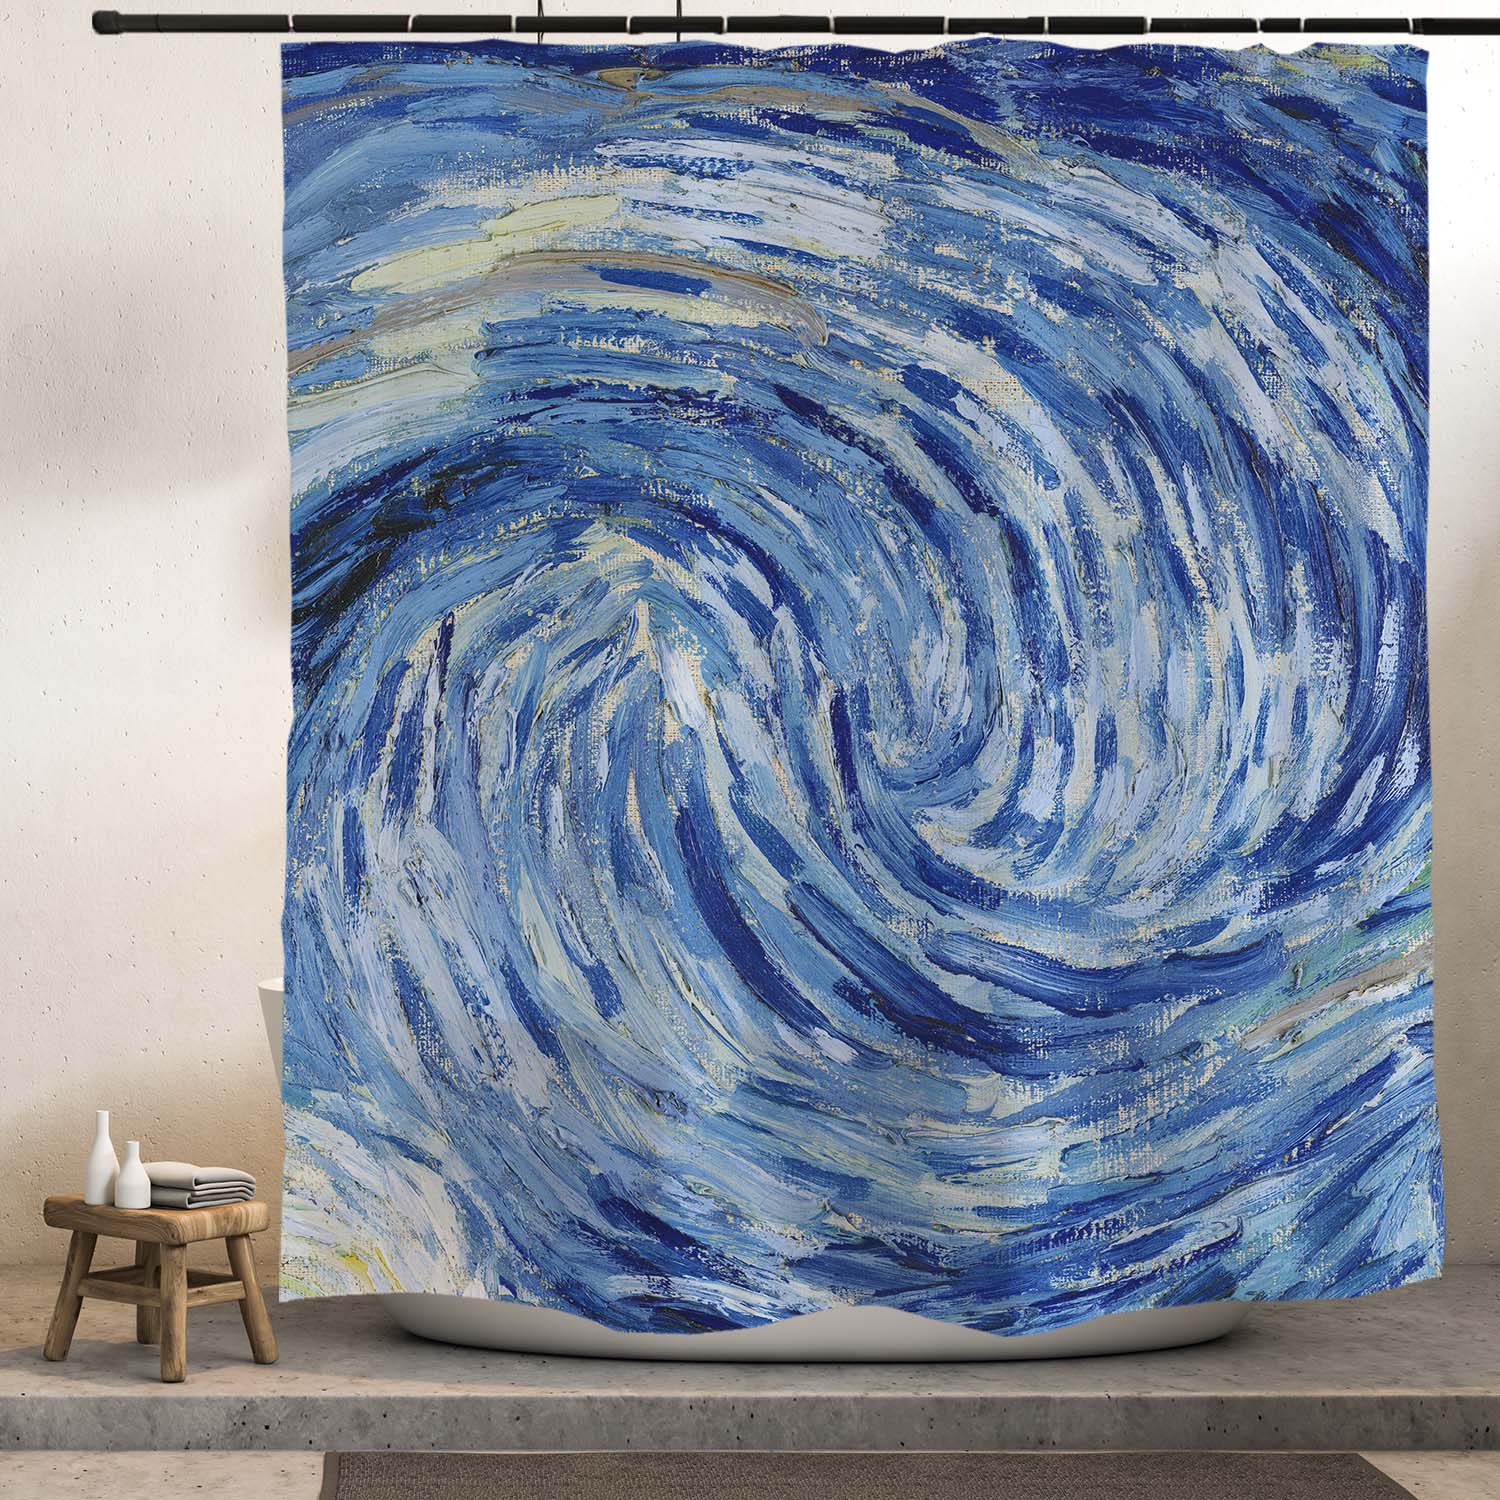 Feblilac Starry Night Shower Curtain with Hooks